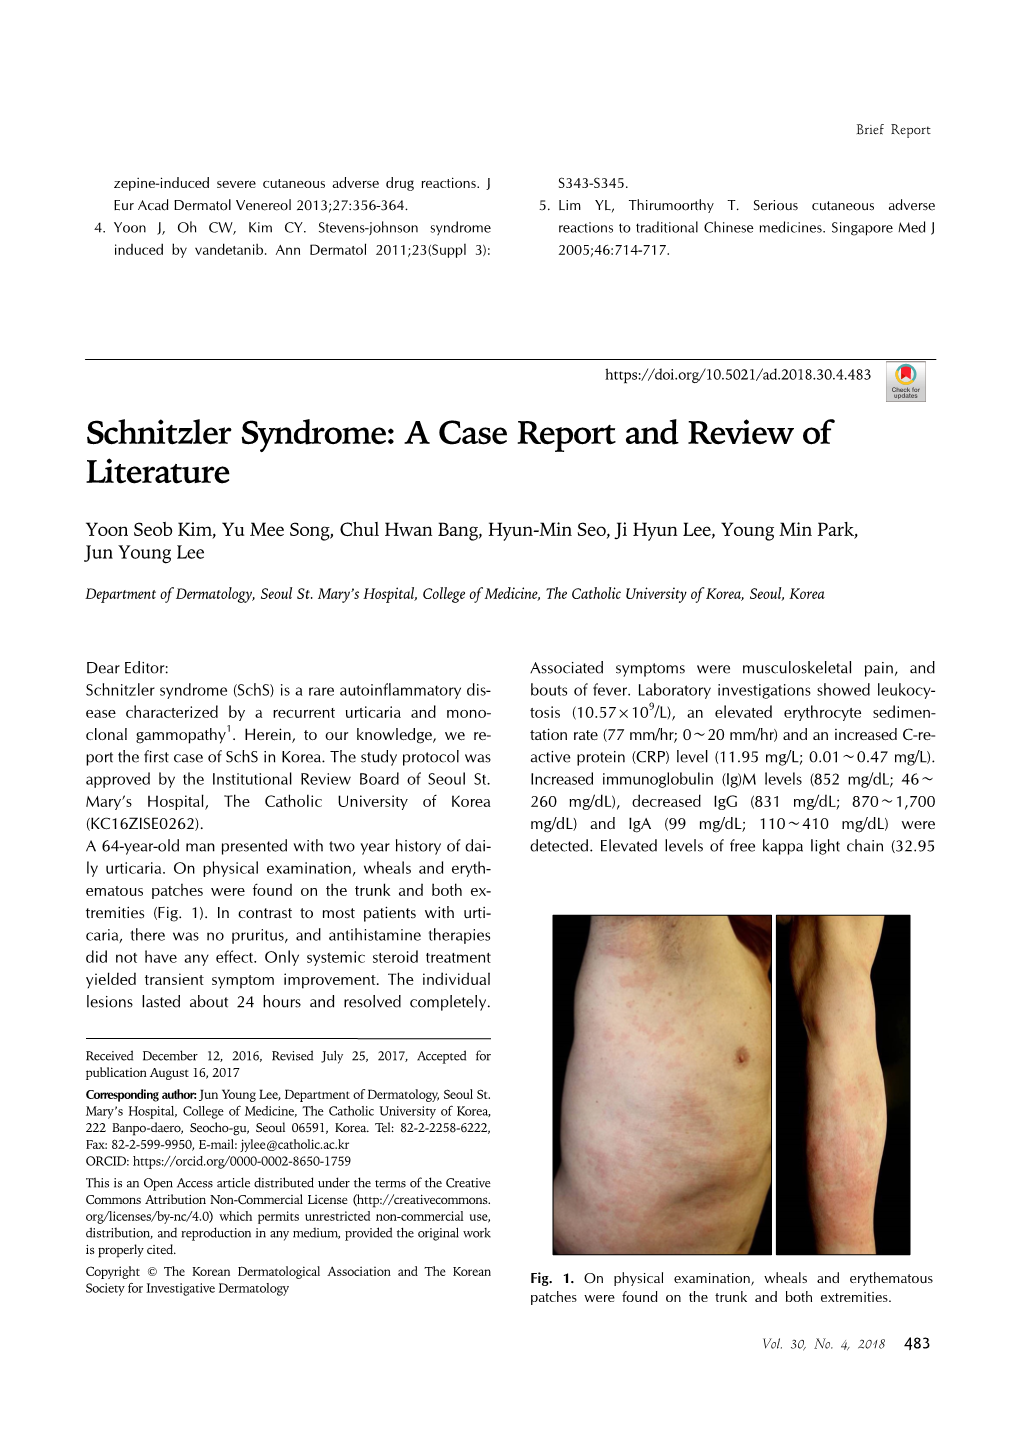 Schnitzler Syndrome: a Case Report and Review of Literature